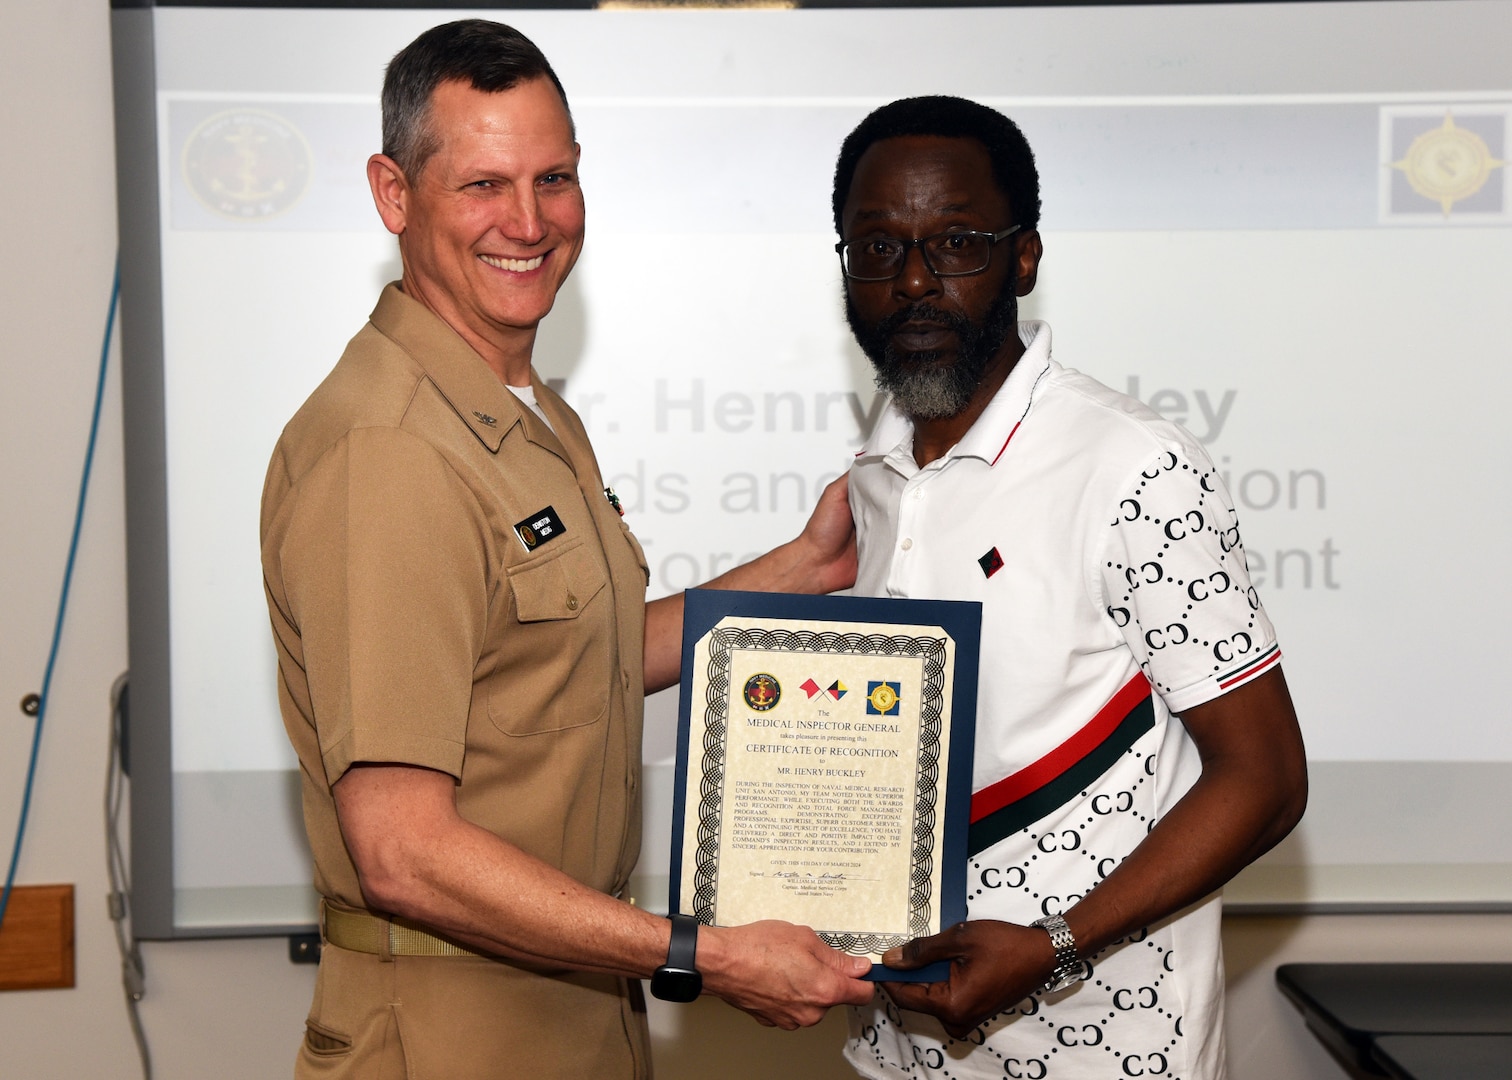 JOINT BASE SAN ANTONIO-FORT SAM HOUSTON – (March 6, 2024) – Henry V. Buckley, head, Administration Department, Naval Medical Research Unit (NAMRU) San Antonio, was recognized by Capt. William Deniston, medical inspector general (MEDIG), U.S. Navy’s Bureau of Medicine and Surgery (BUMED), for his exceptional professionalism and expertise for serving as the program manager for Awards and Recognition, and Total Force Management during the MEDIG outbrief held at the Battlefield Health and Trauma Research Institute. Approximately 12 inspectors conducted evaluations of 40 programs and collateral duties over three days at Naval Medical Research Unit (NAMRU) San Antonio to improve command performance and processes. NAMRU San Antonio’s mission is to conduct gap driven combat casualty care, craniofacial, and directed energy research to improve survival, operational readiness, and safety of DoD personnel engaged in routine and expeditionary operations. It is one of the leading research and development laboratories for the U.S. Navy under the DoD and is one of eight subordinate research commands in the global network of laboratories operating under the Naval Medical Research Command in Silver Spring, Md. (U.S. Navy photo by Burrell Parmer, NAMRU San Antonio Public Affairs/Released)